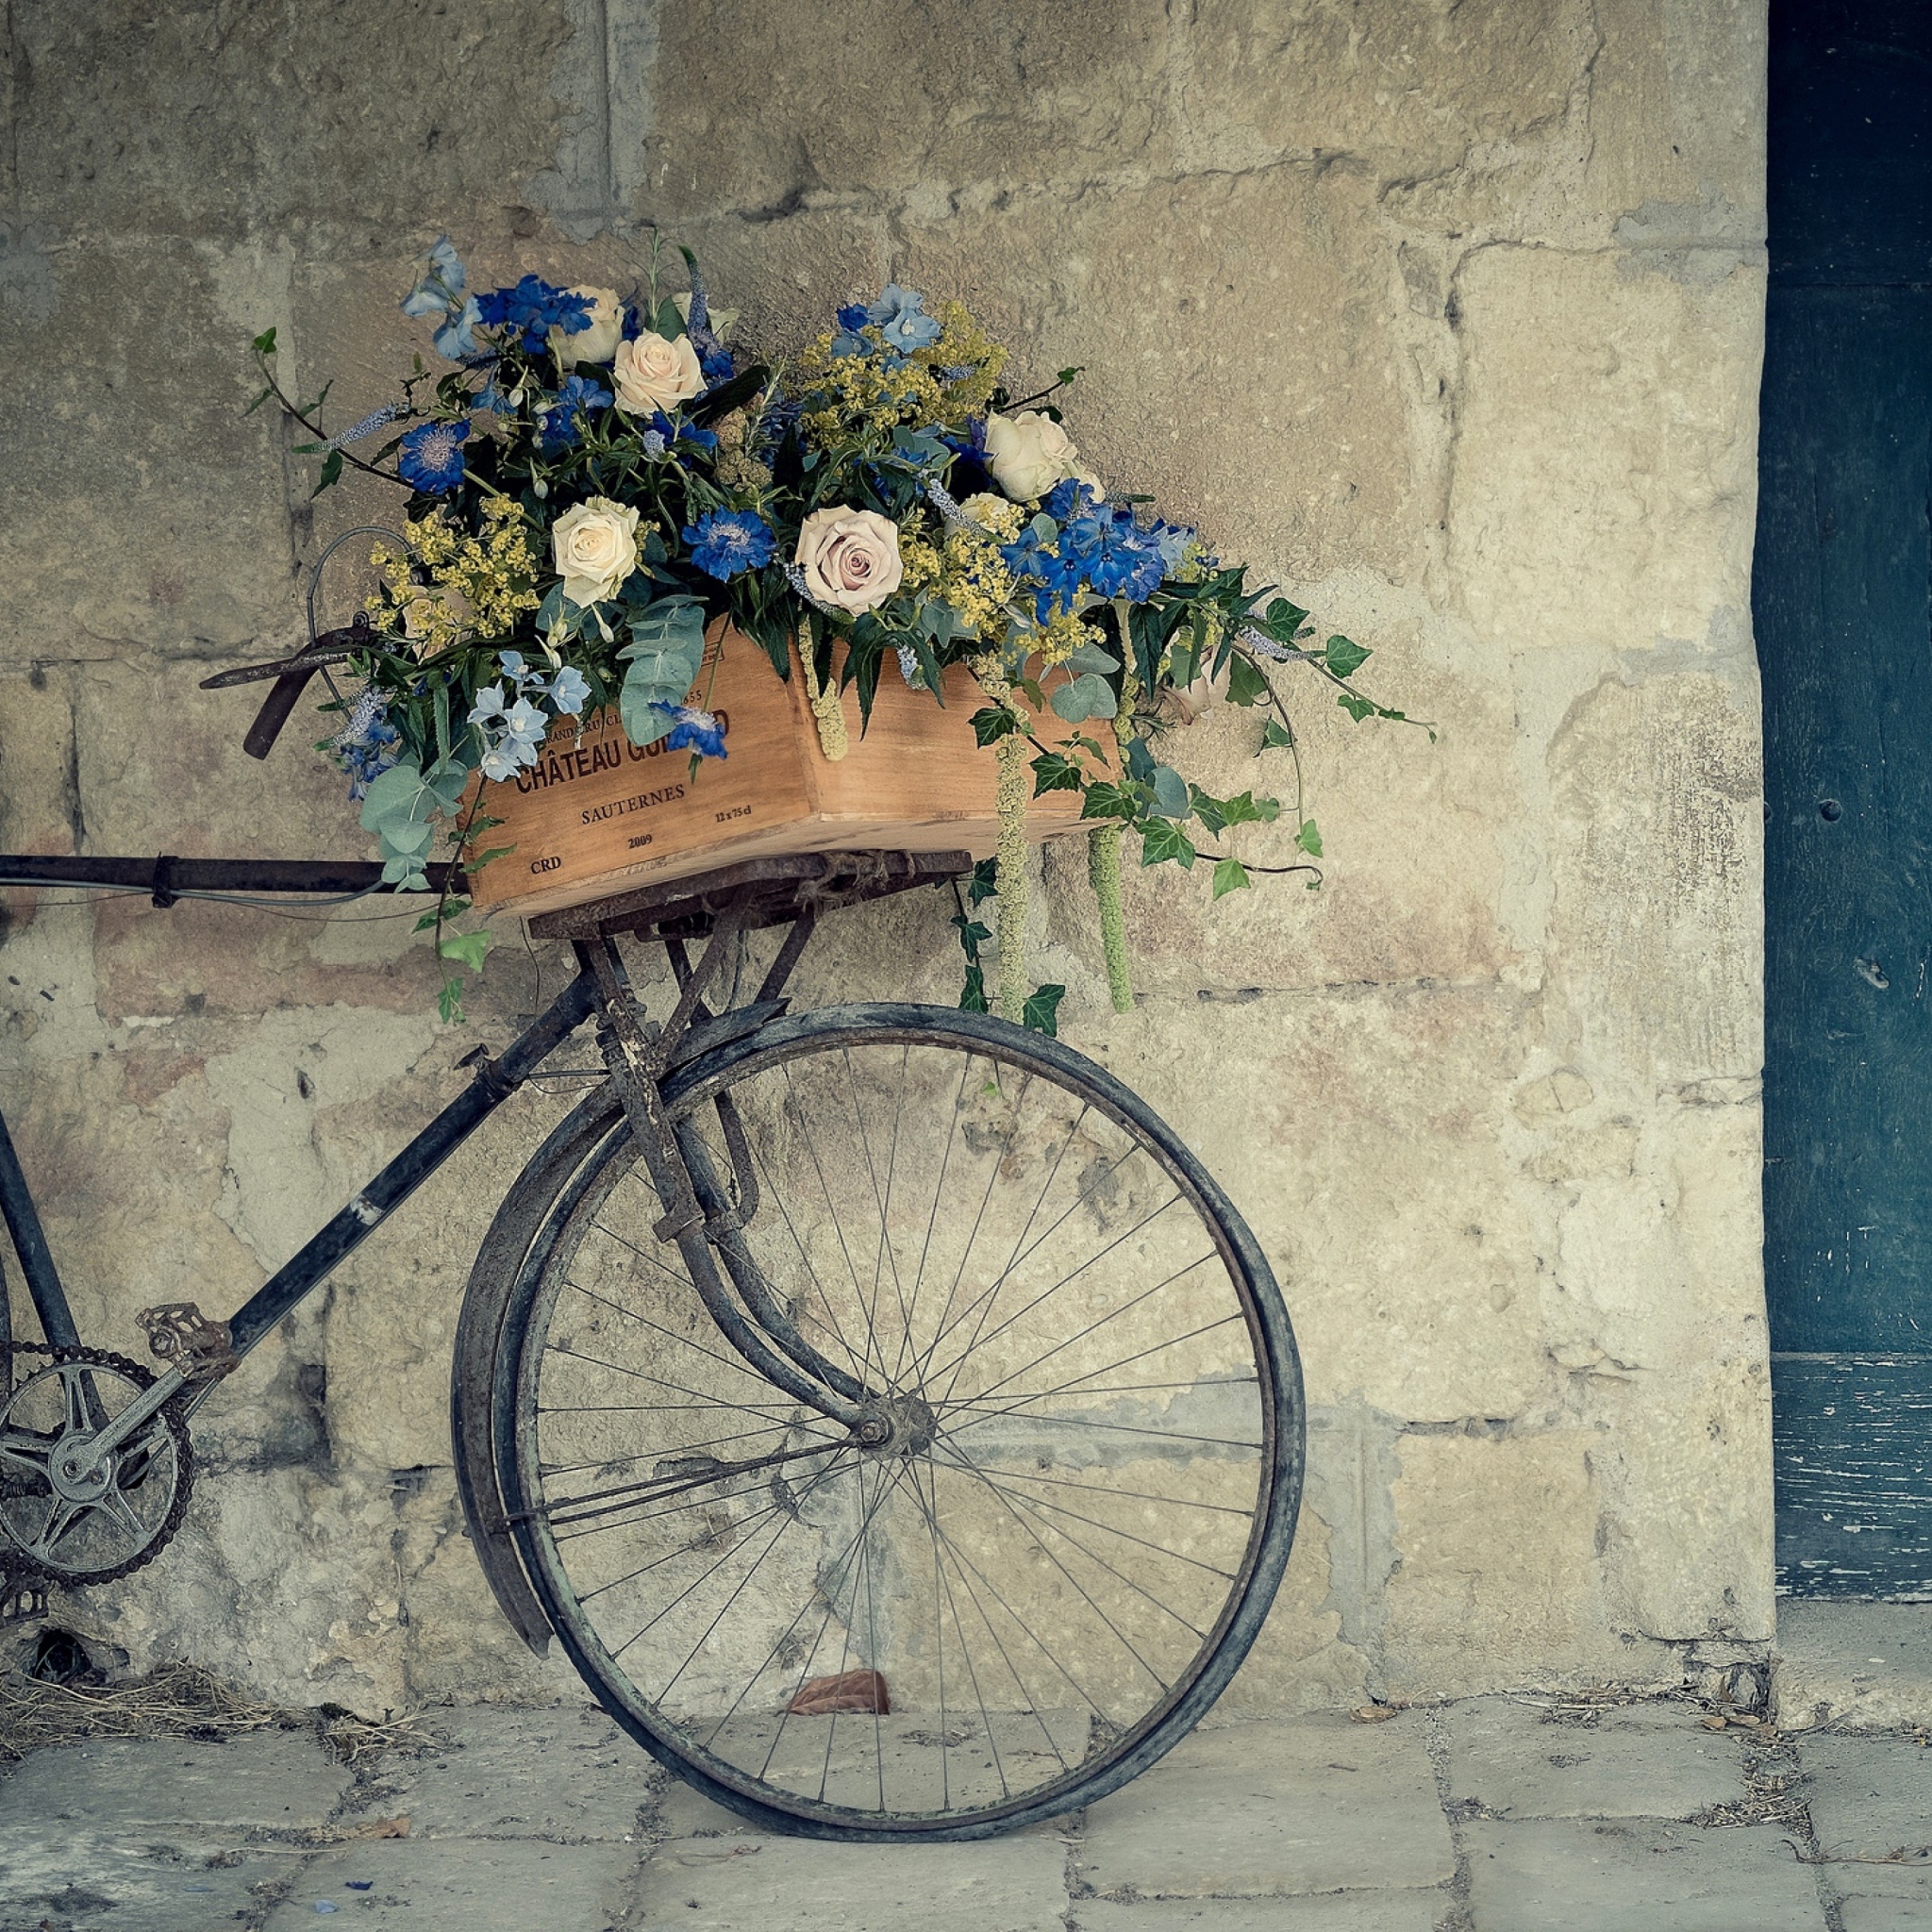 Sfondi Bicycle With Basket Full Of Flowers 2048x2048